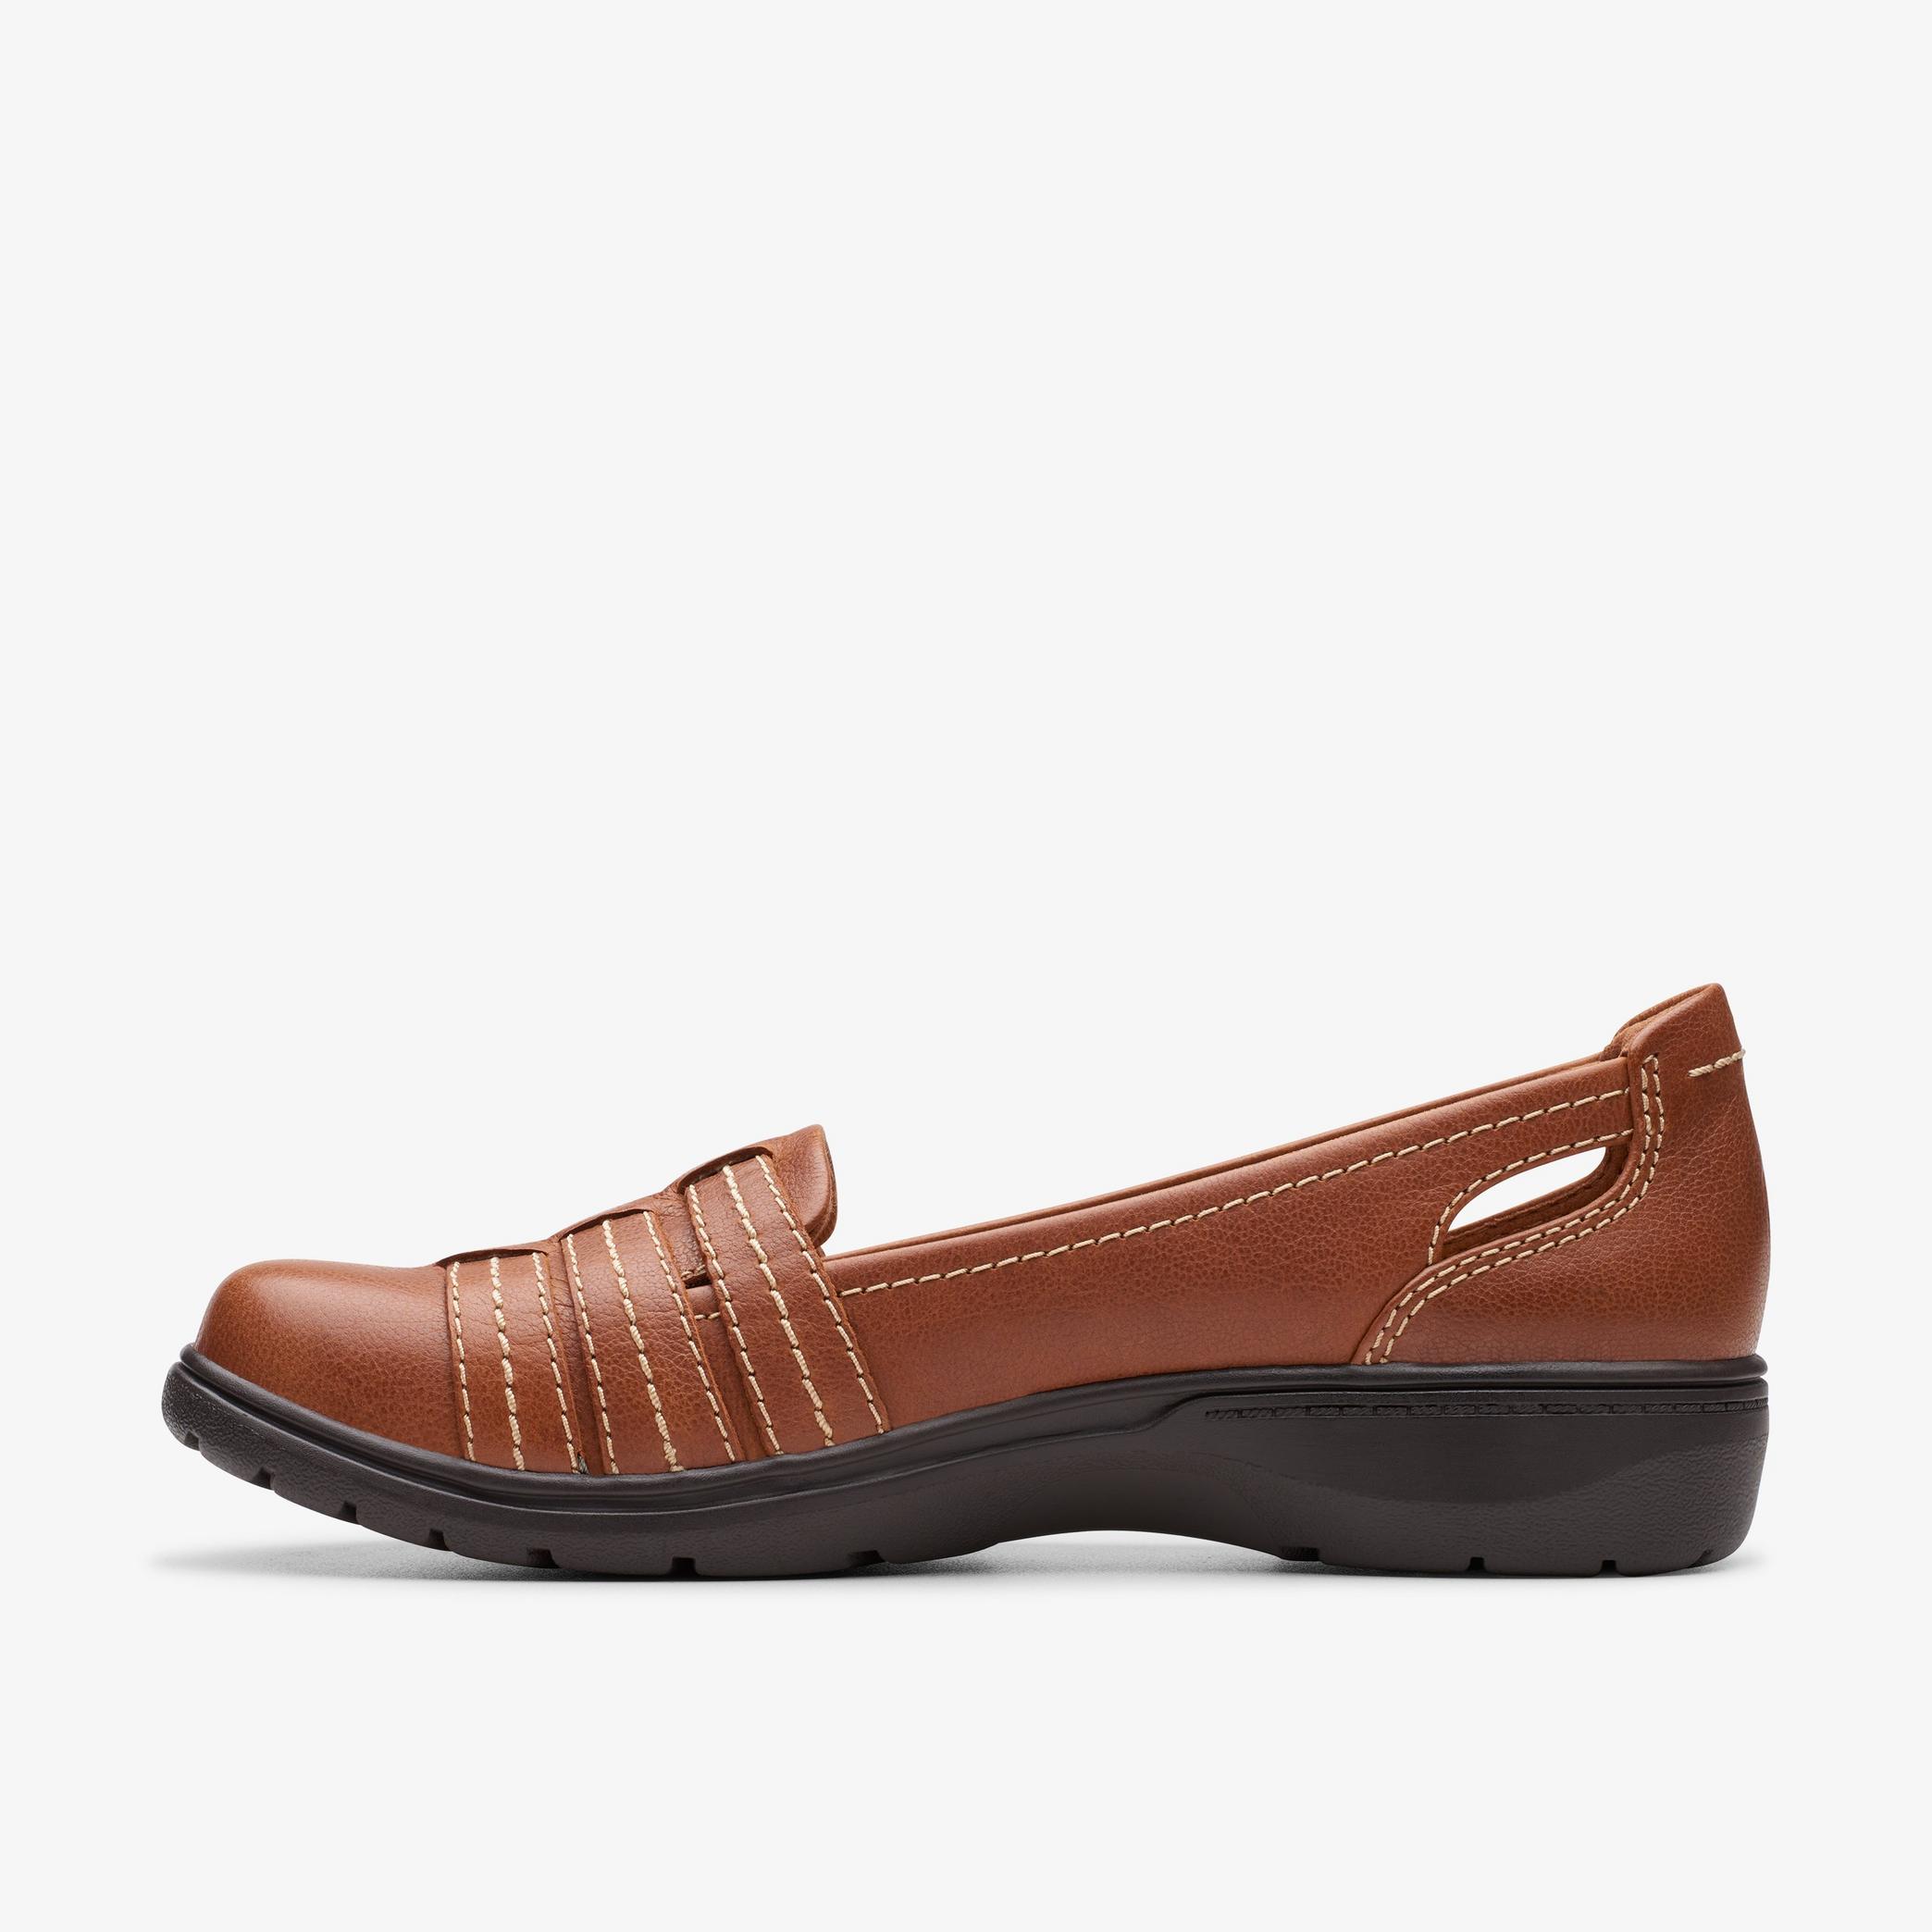 Carleigh Eliza Tan Leather Slip Ons, view 2 of 6